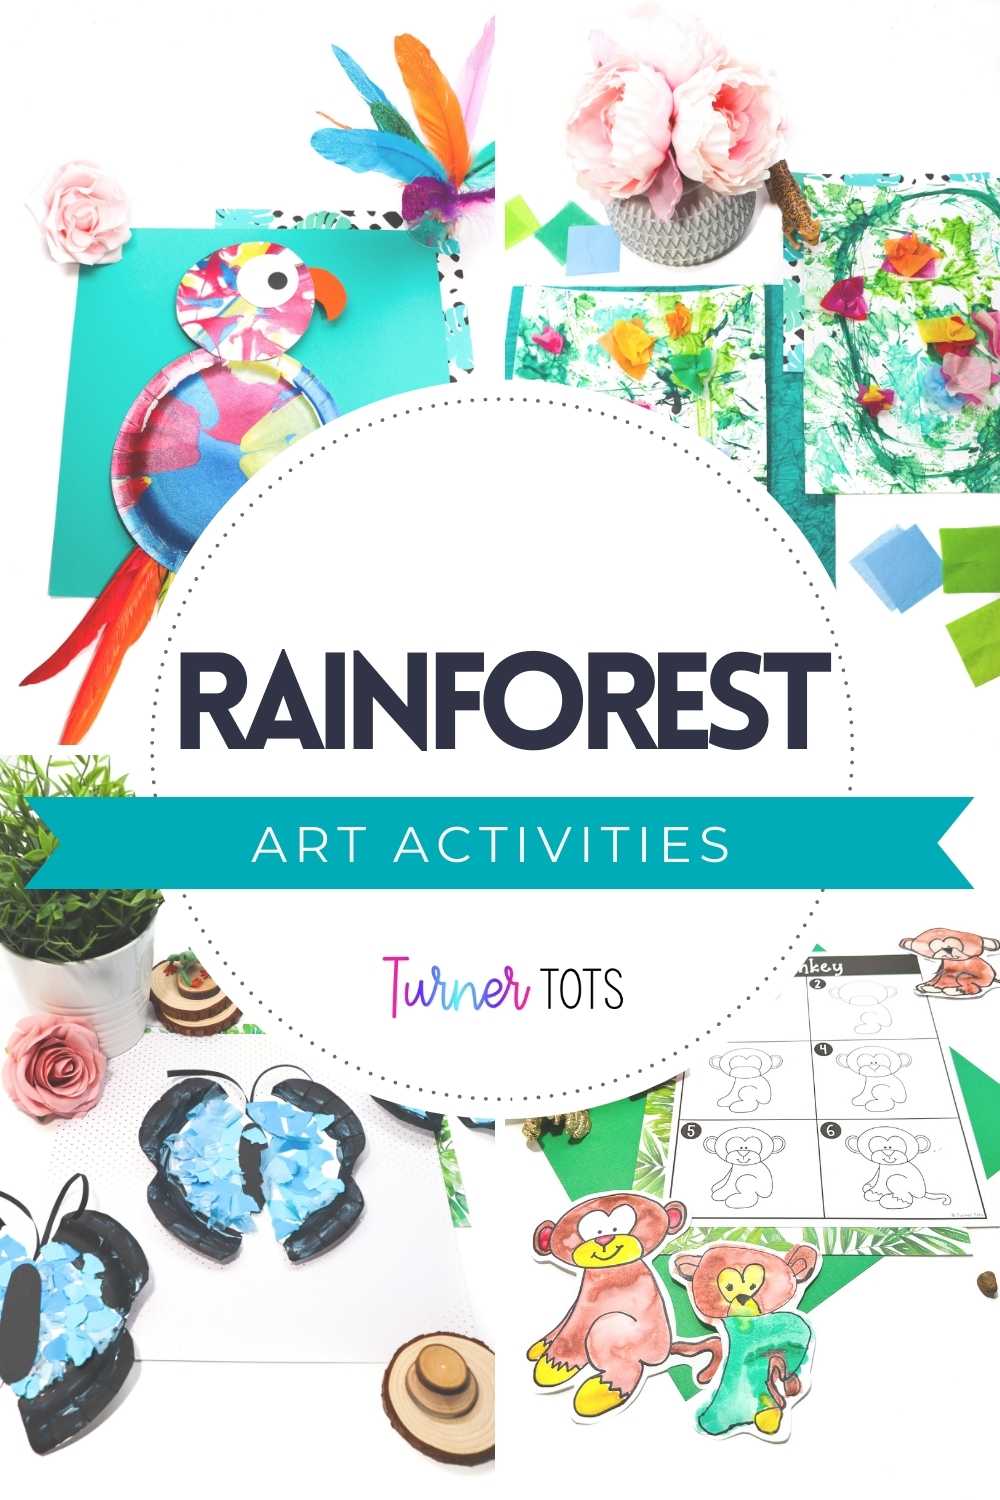 Jungle art activities include a parrot spin art craft, rainforest leaf print paintings, a blue morpho butterfly craft, and jungle directed drawings.